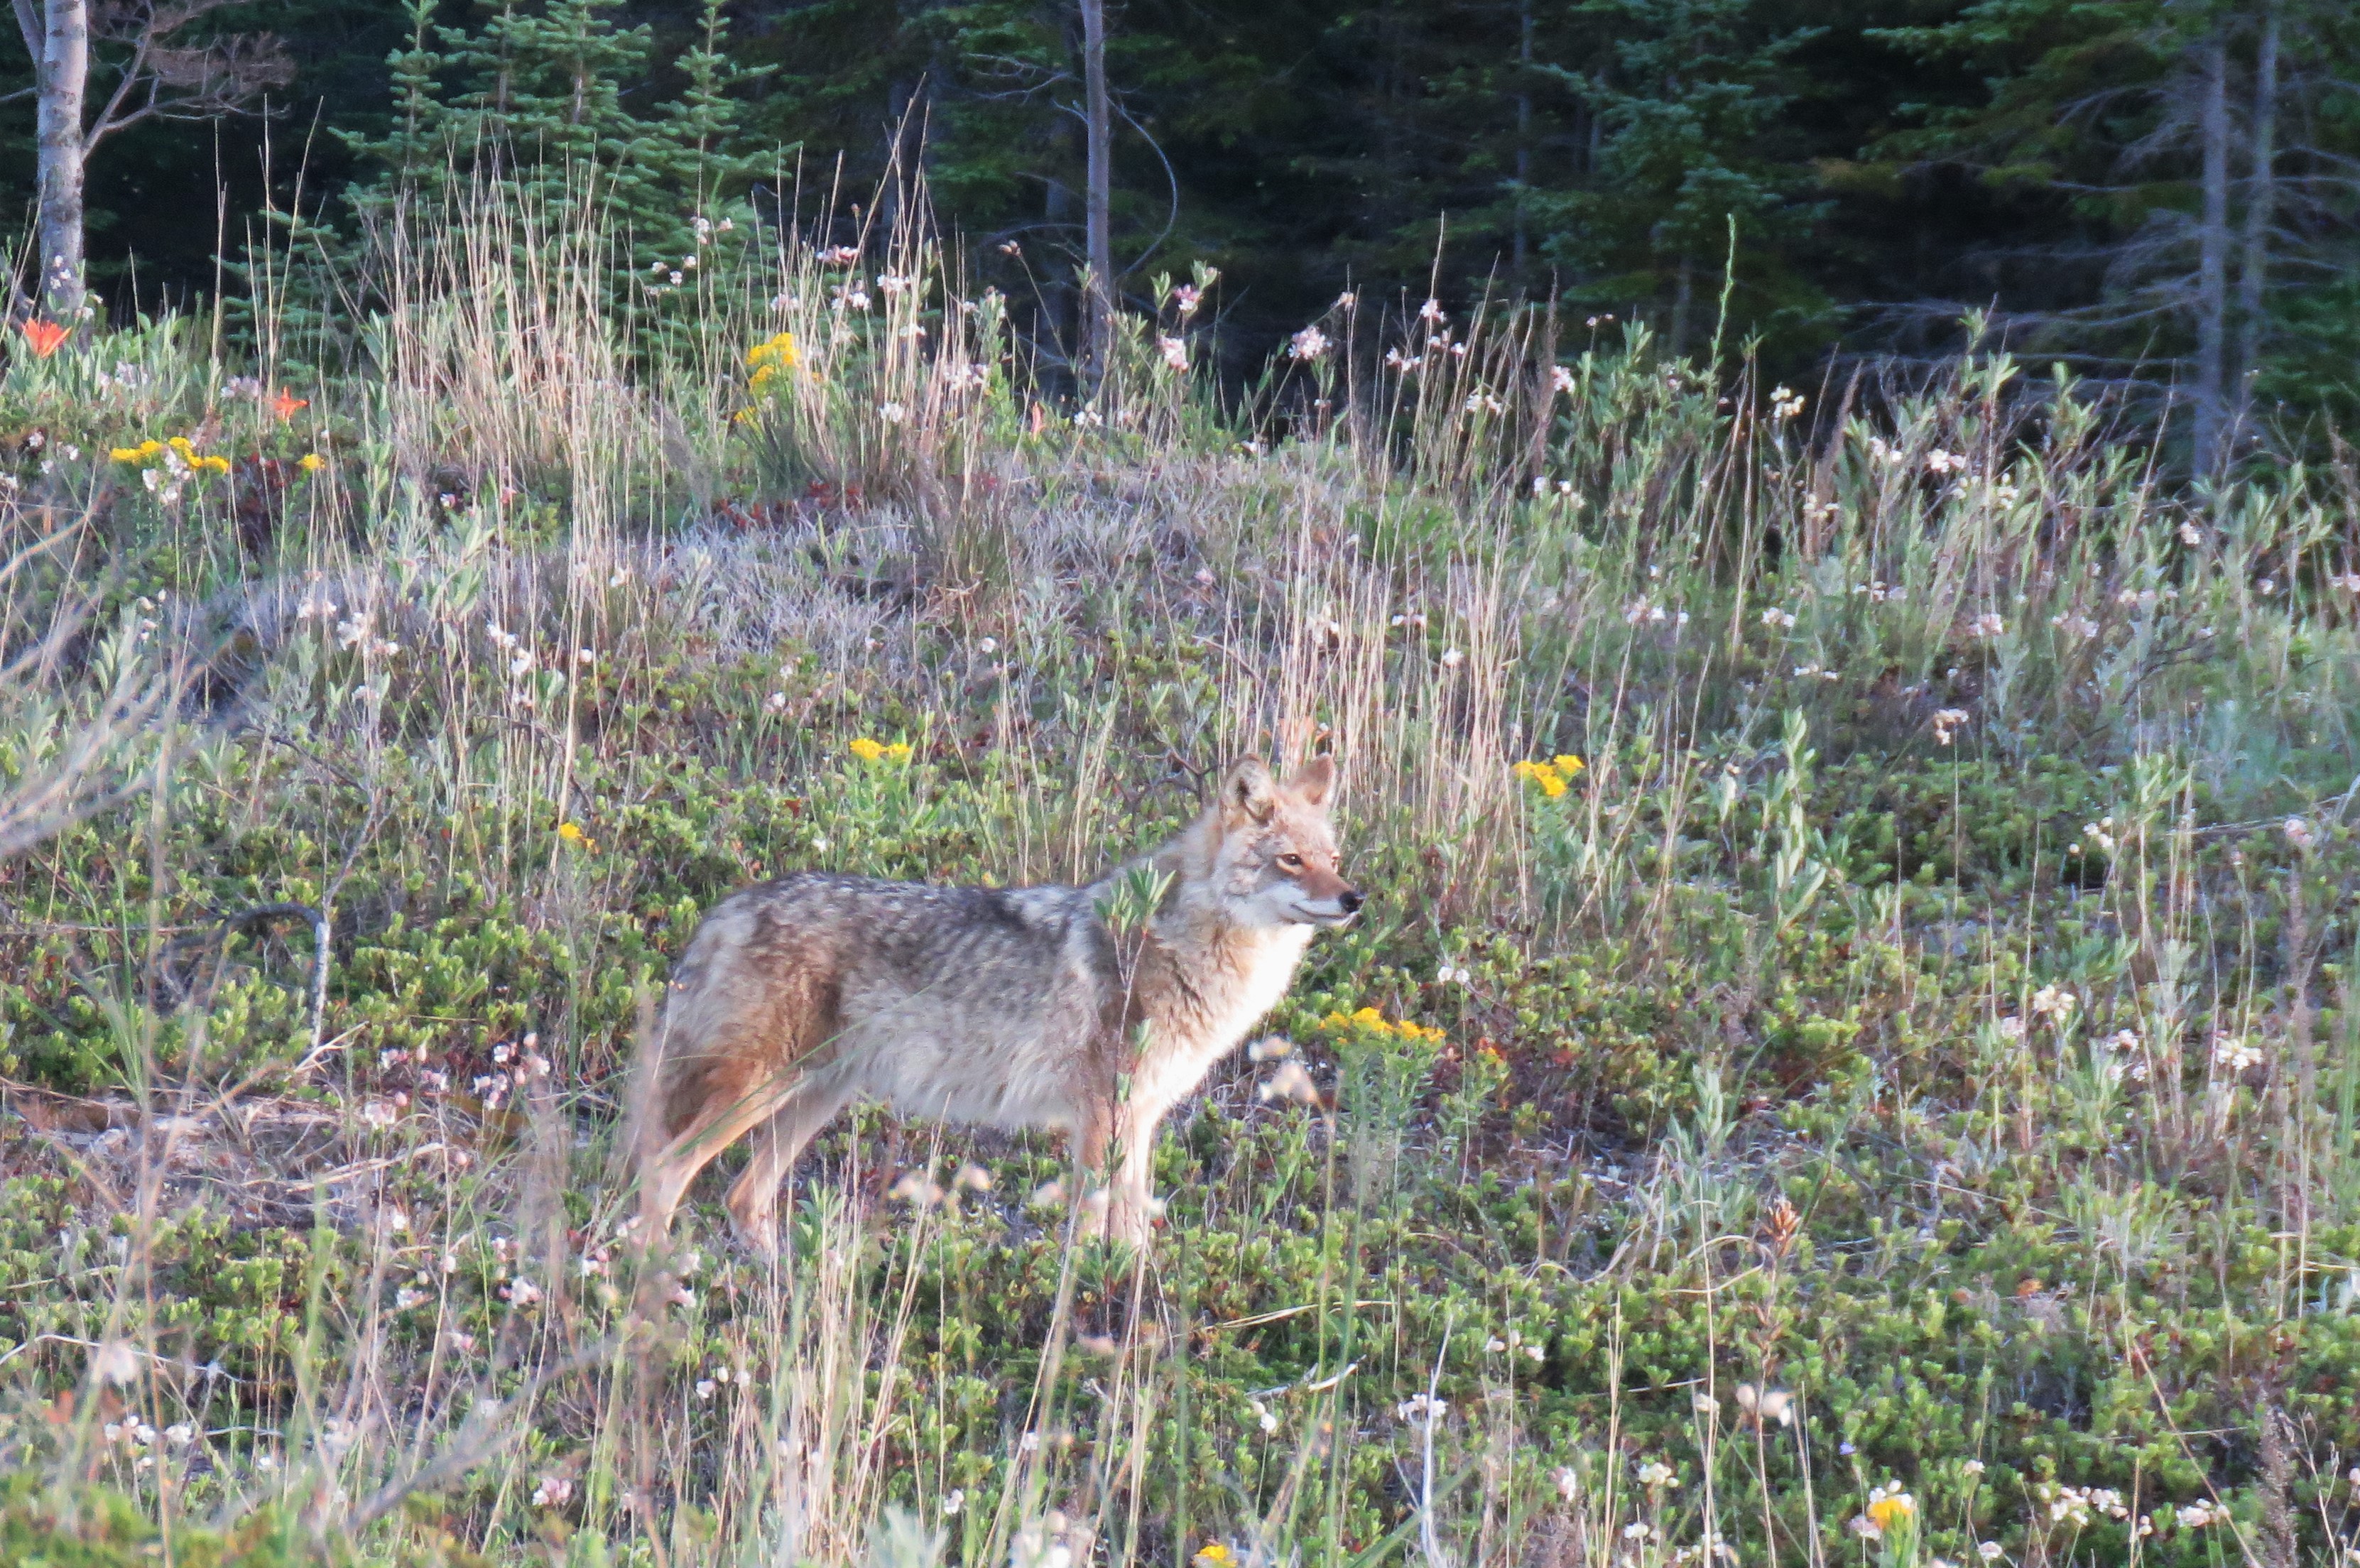 A coyote stands at attention on dune filled with weeds and wildflowers